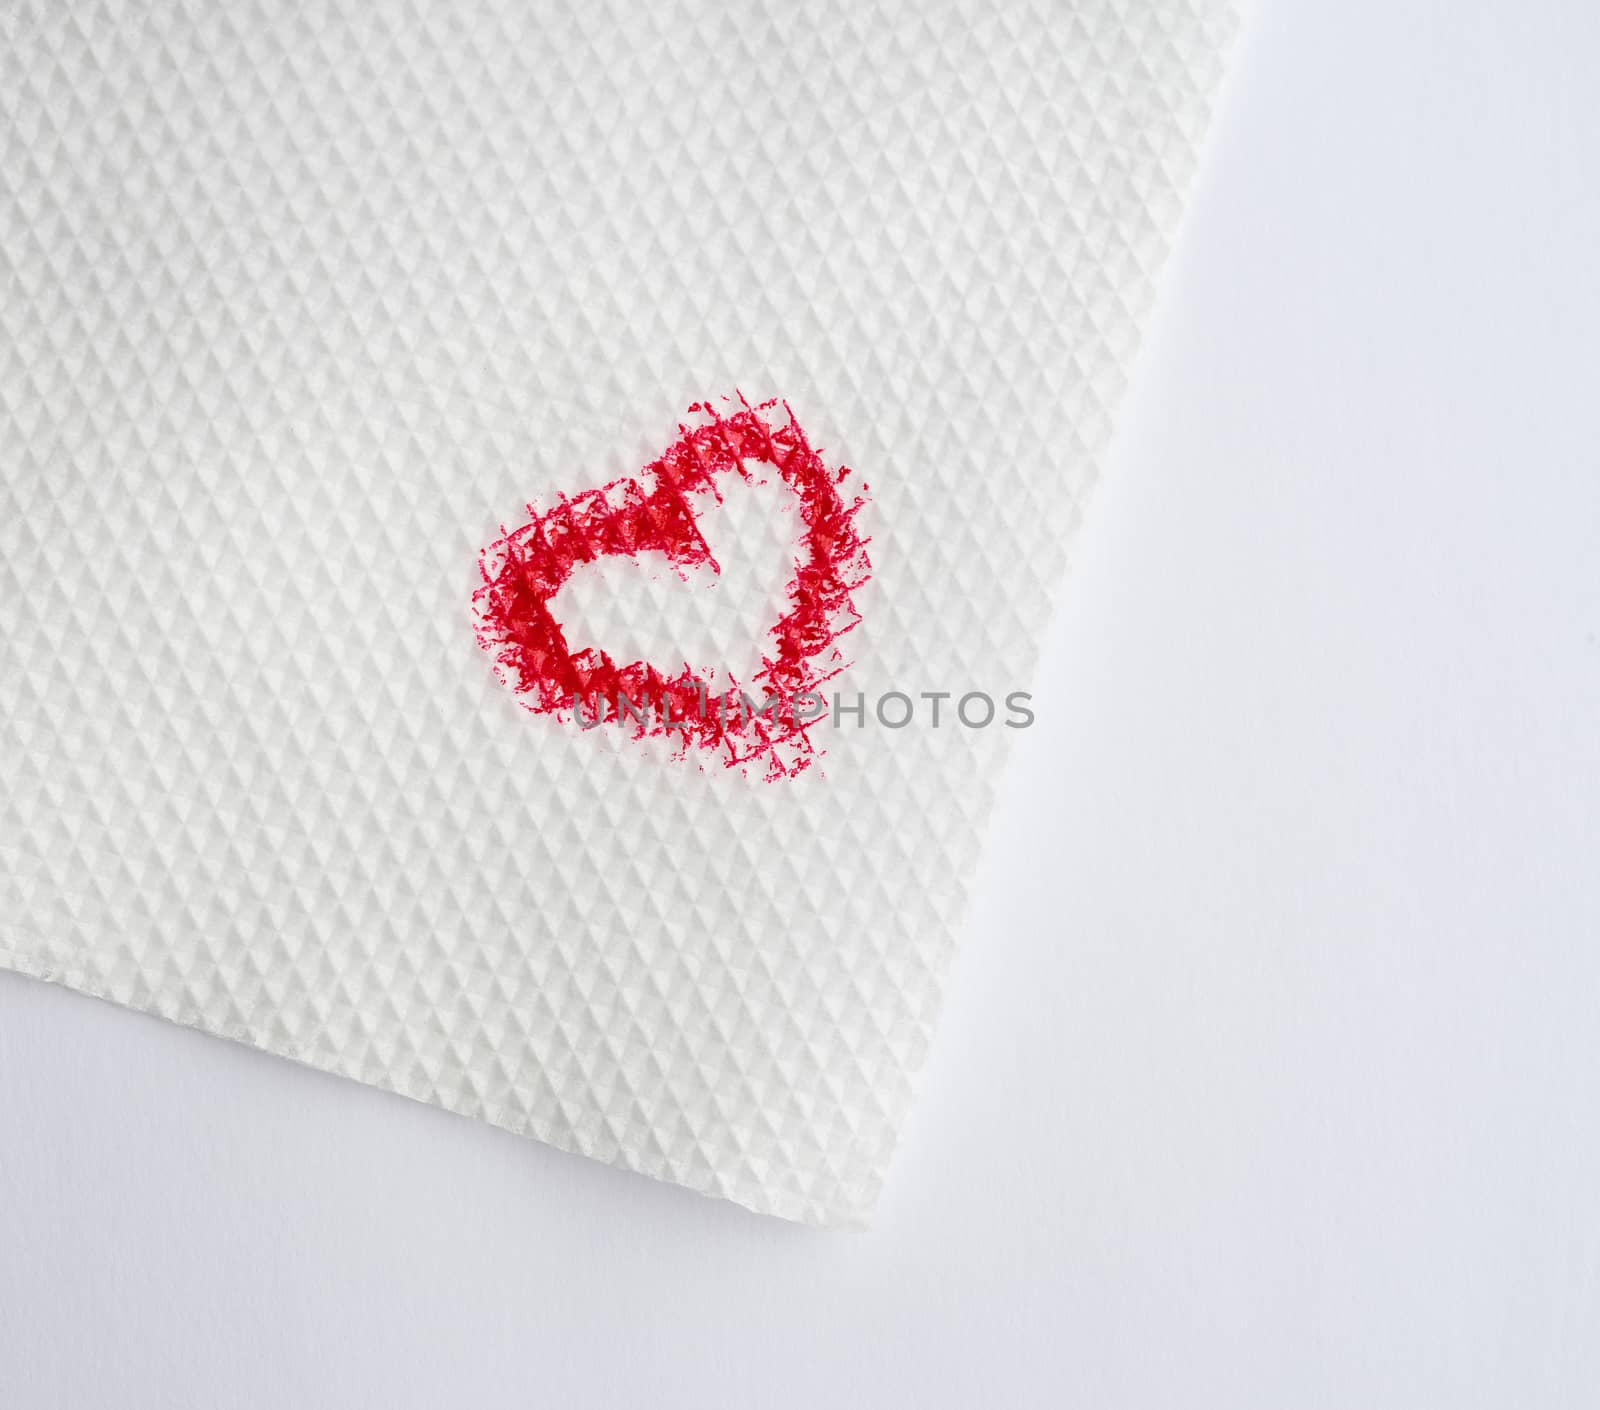 painted heart with red lipstick on a white paper napkin, close up